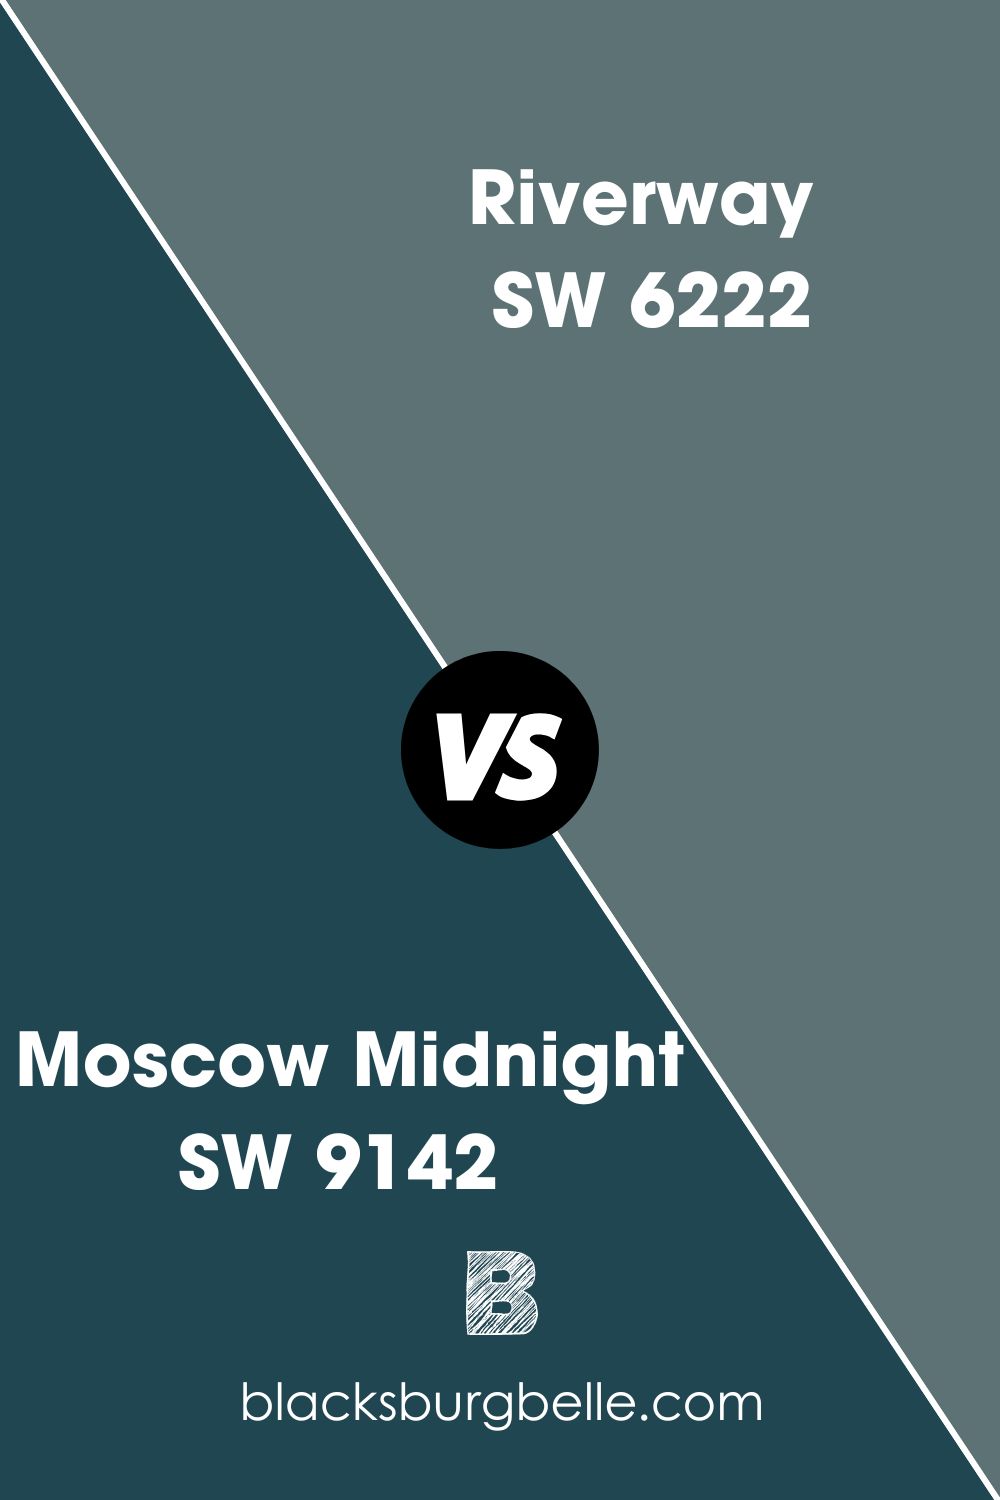 Moscow Midnight SW 9142 